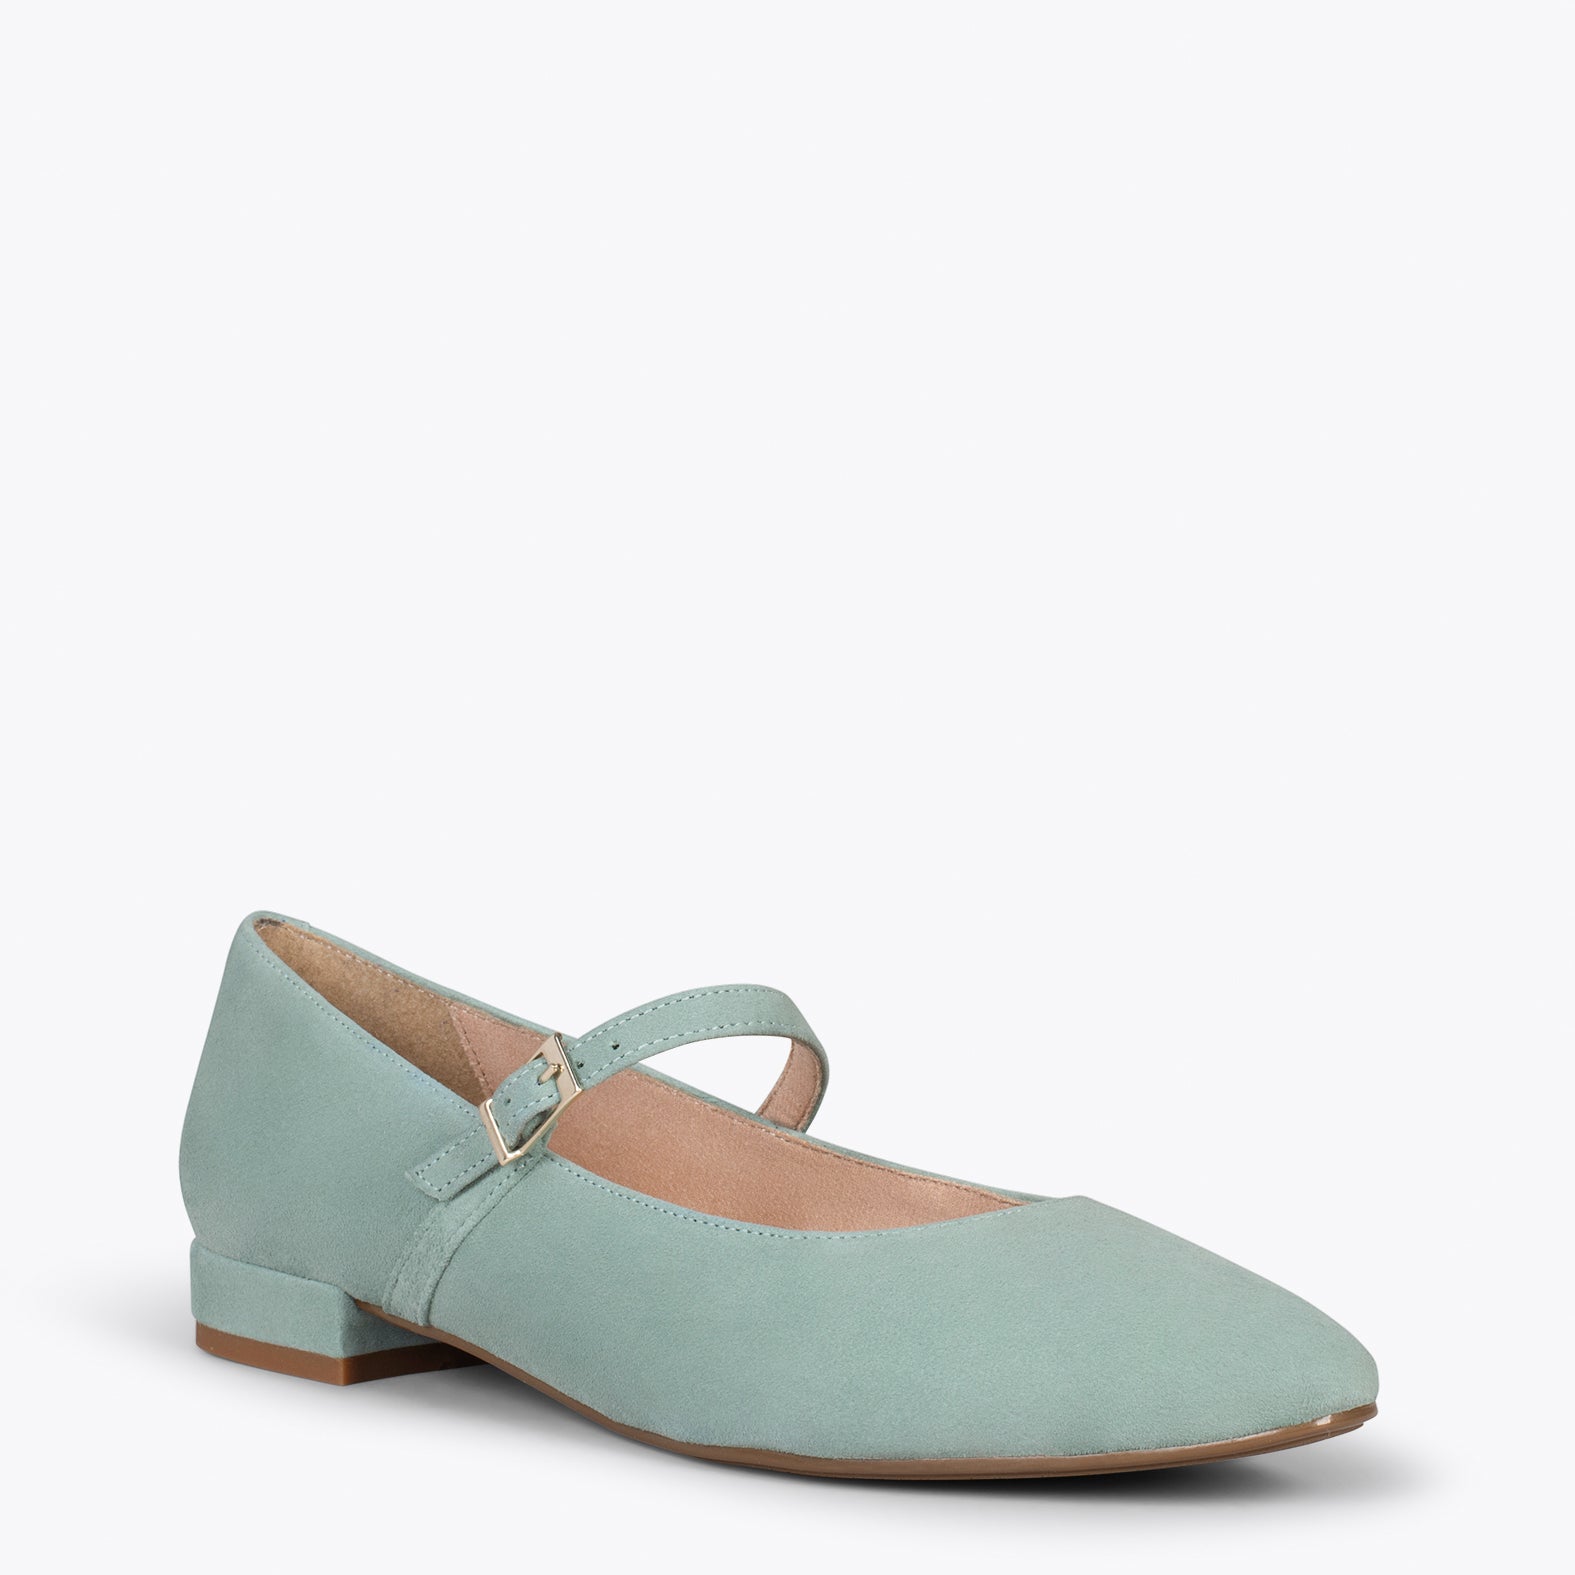 MARY-JANE – SAGE buckled leather flats